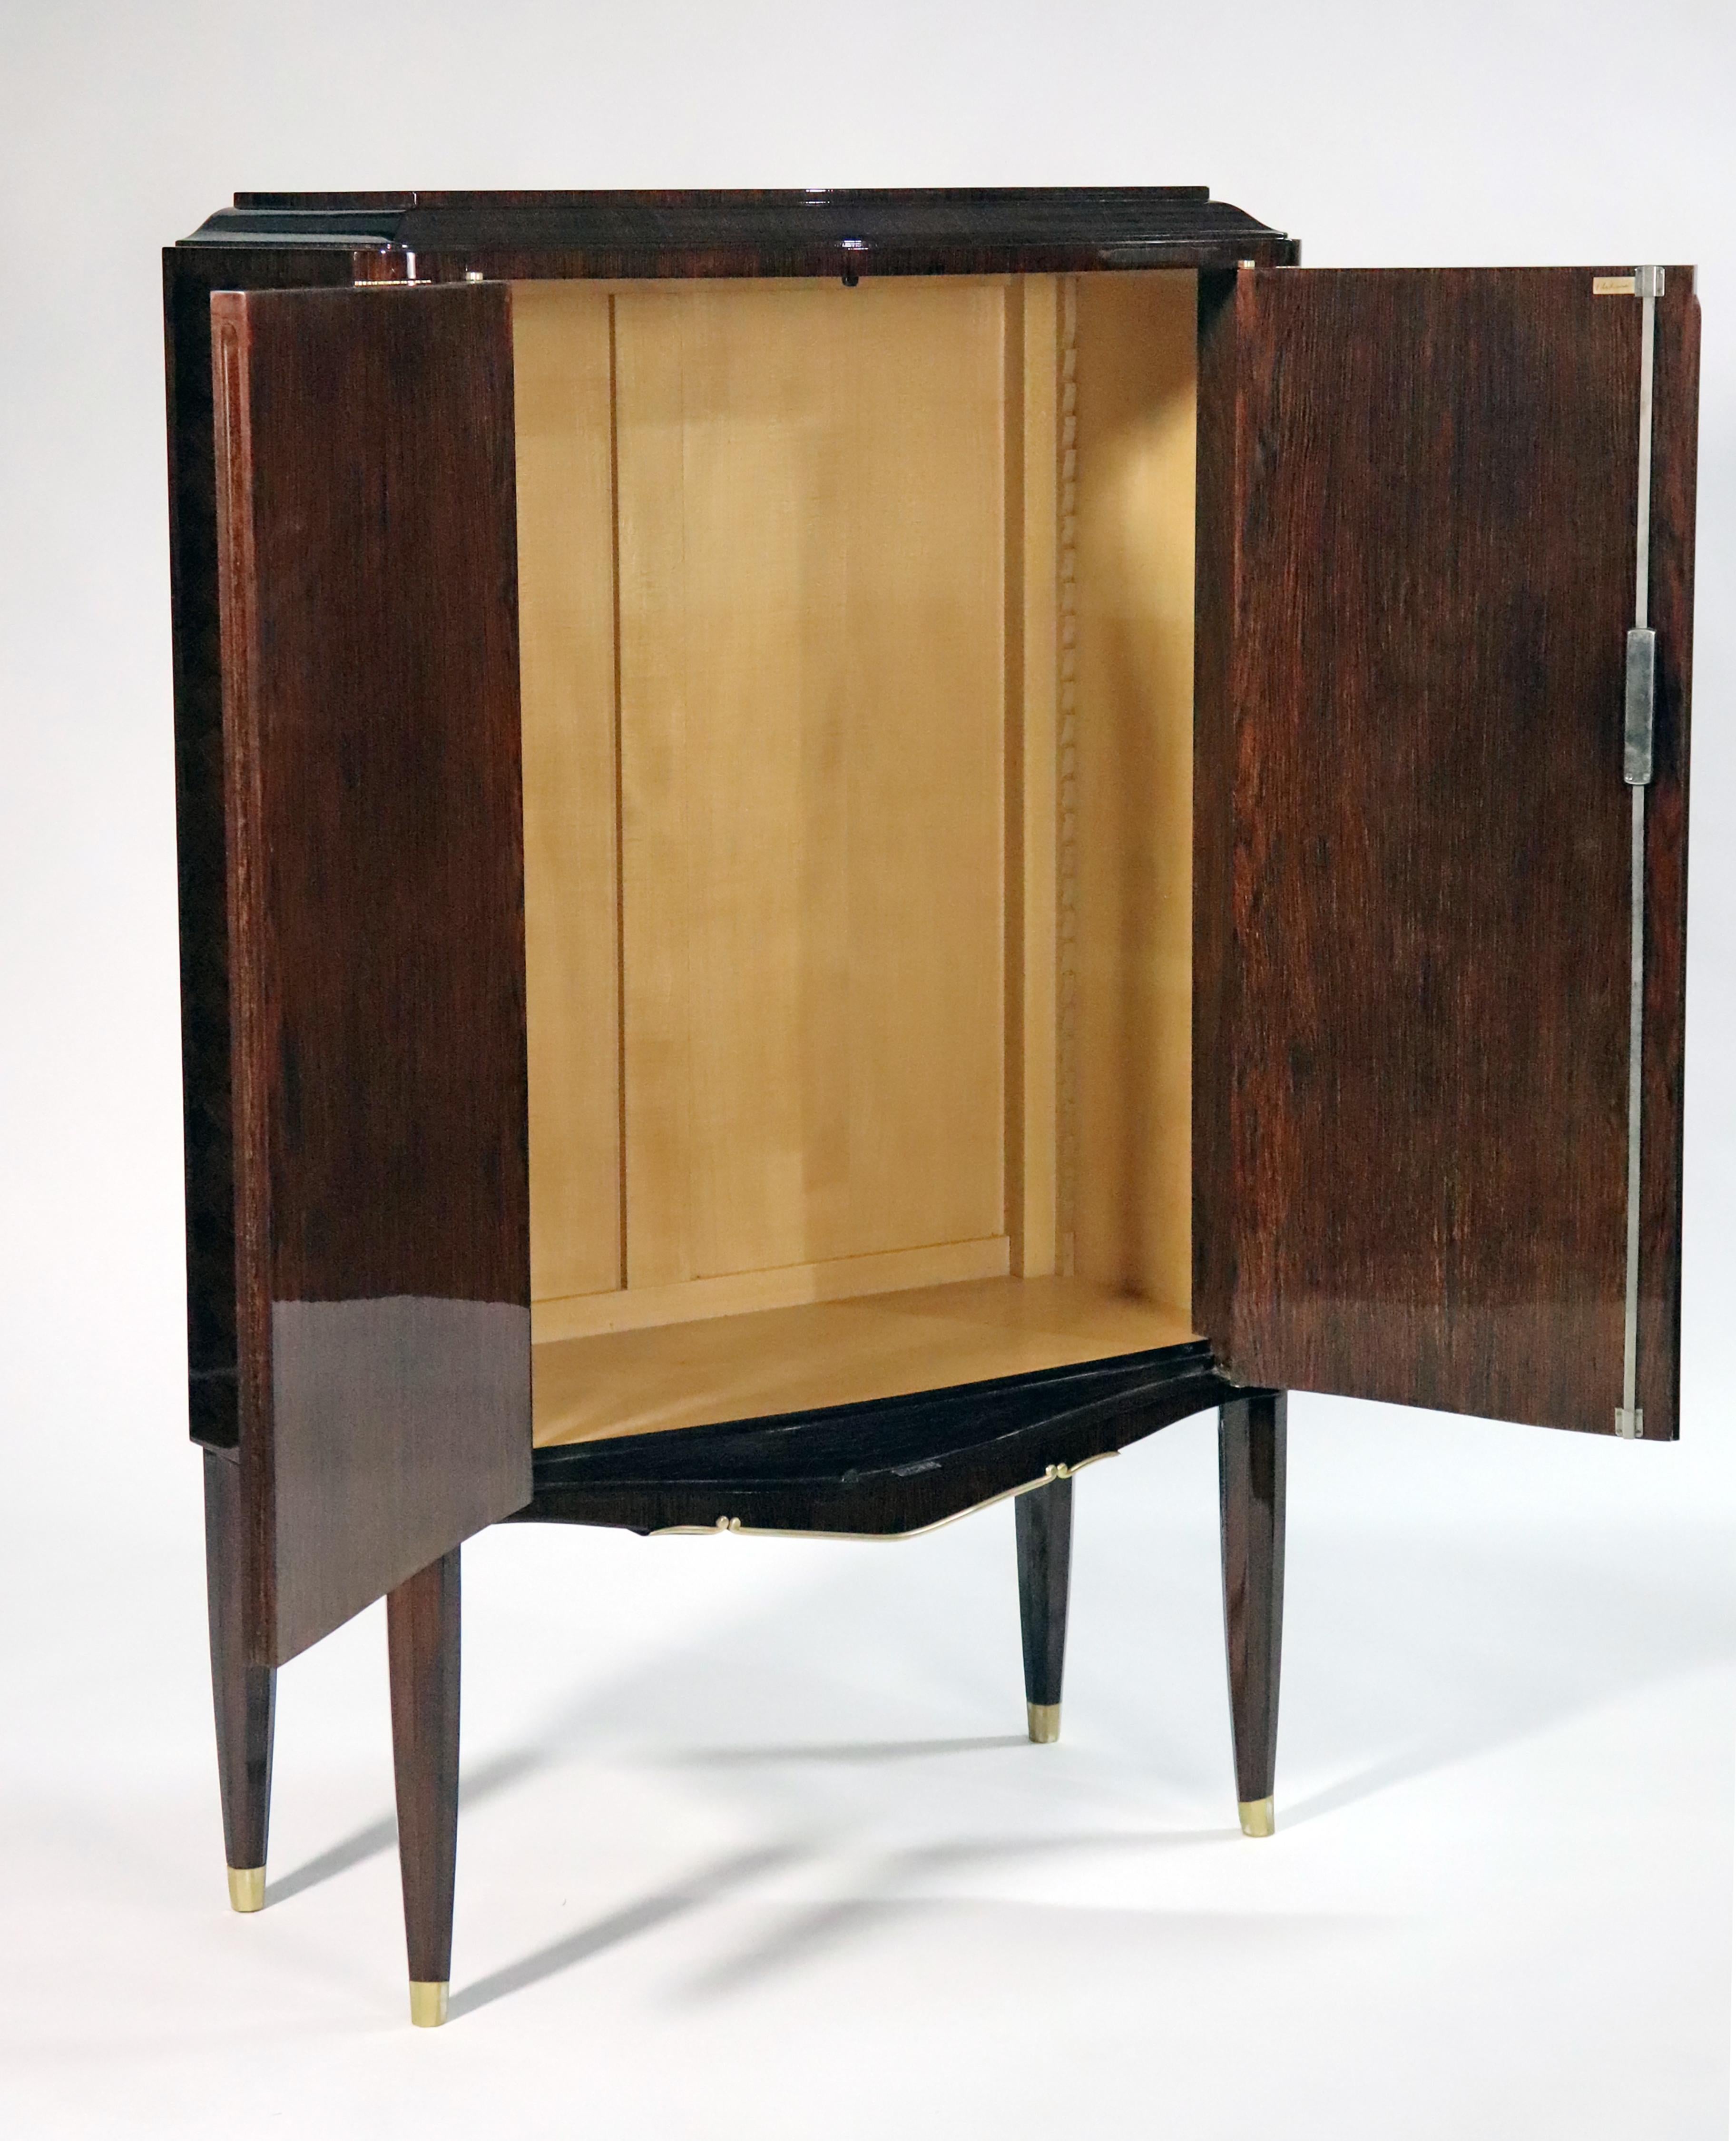 A 2-door Art Deco cabinet made from Rosewood with Bronze details along the sides.  Each door is made with a marquetry veneer and mother of pearl and ebony inlays depicting different sized wild flowers. This cabinet has 2 shelves inside in Sycamore